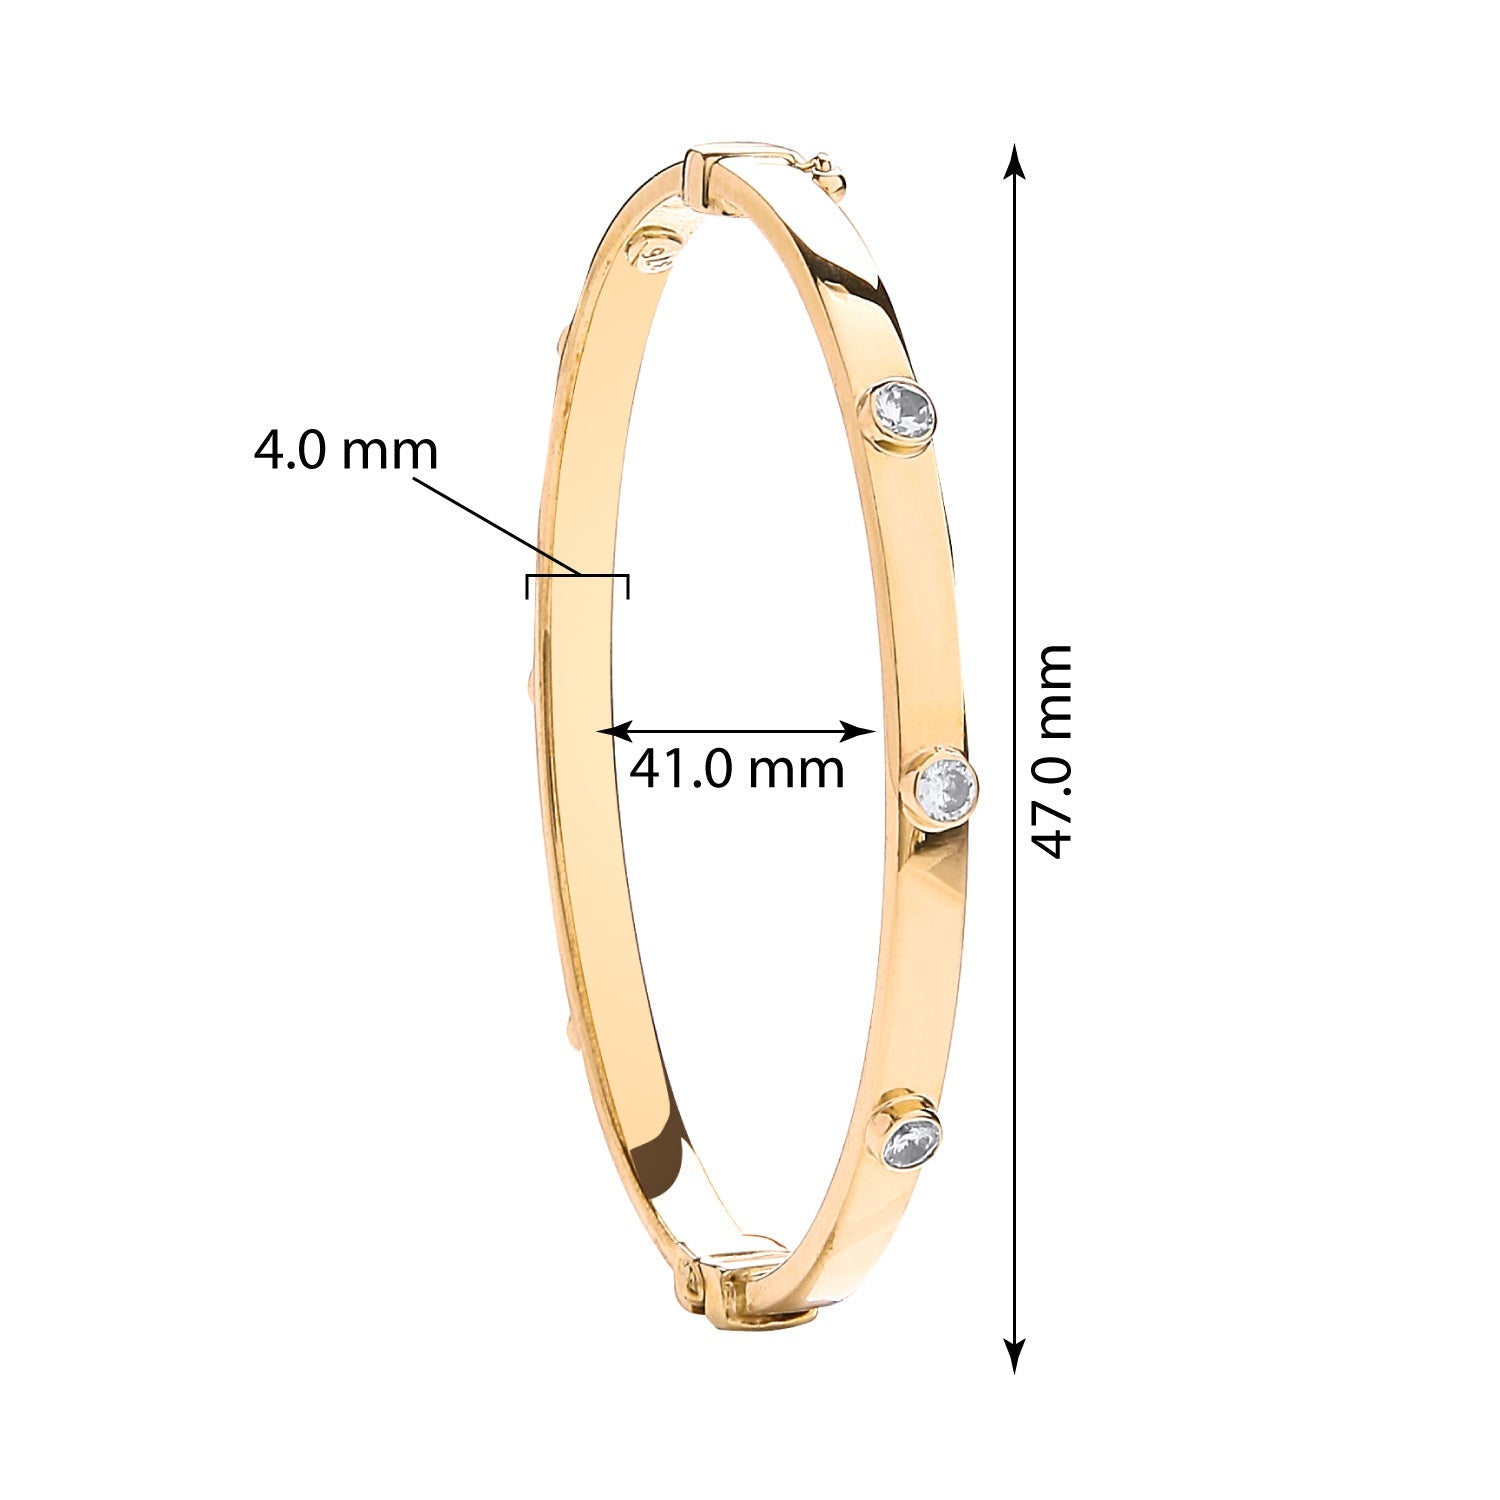 9ct Yellow Gold Childs Bangle 4mm - FJewellery